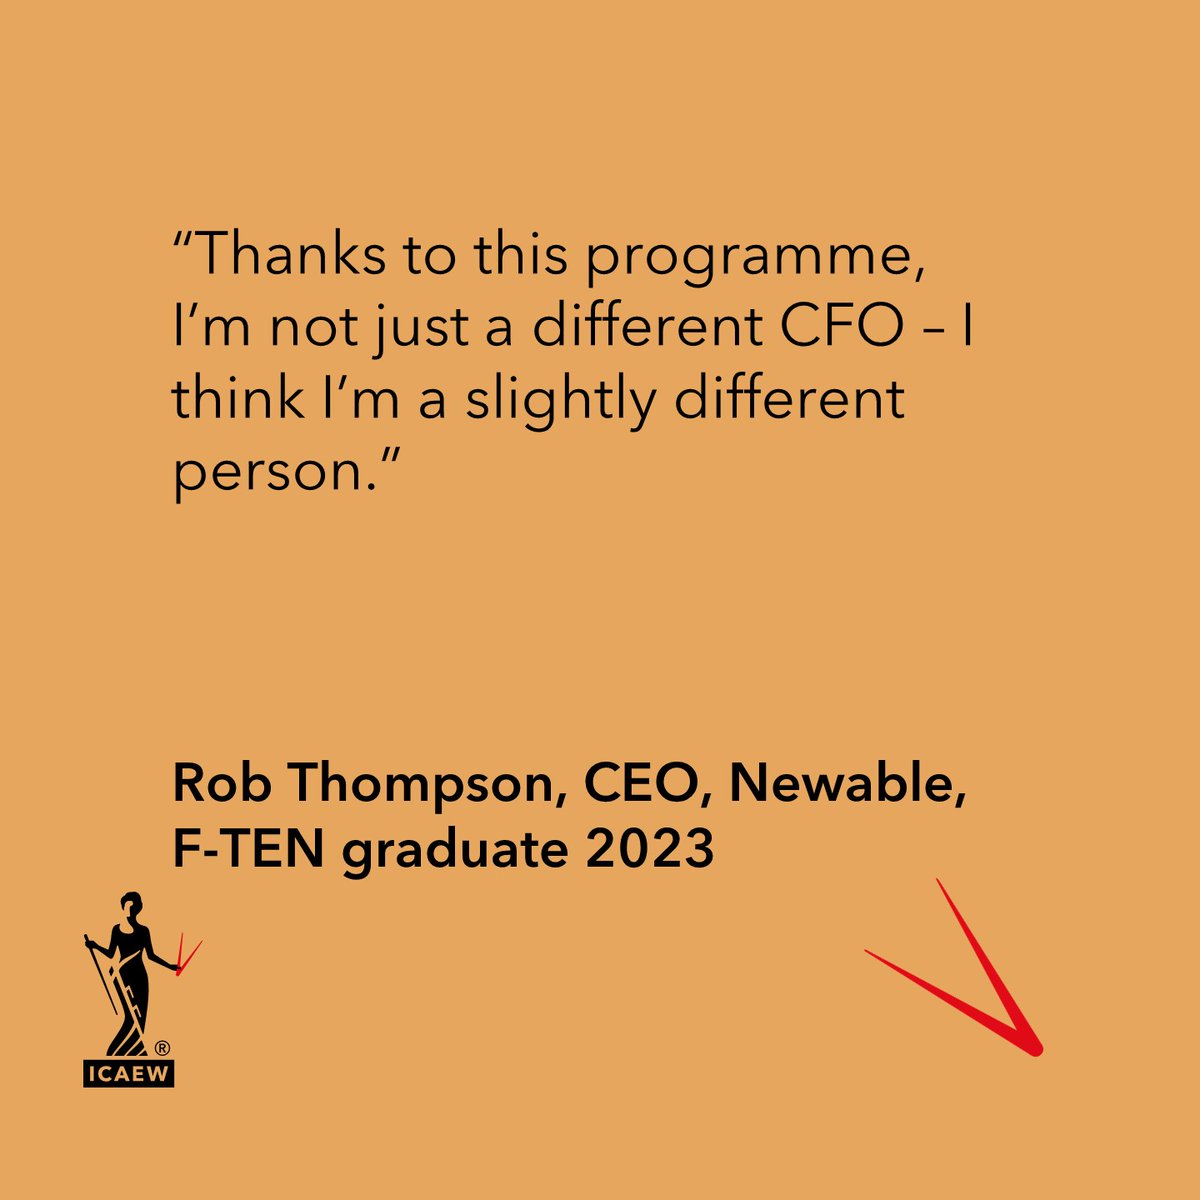 Read Rob Thompson’s, CFO for Newable account on how ICAEW's Fincial Talent Executive Netowrk F-TEN programme helped him prepare for his next exciting career move: ow.ly/xJQ750QJnL5

#icaewAcademy #leadership